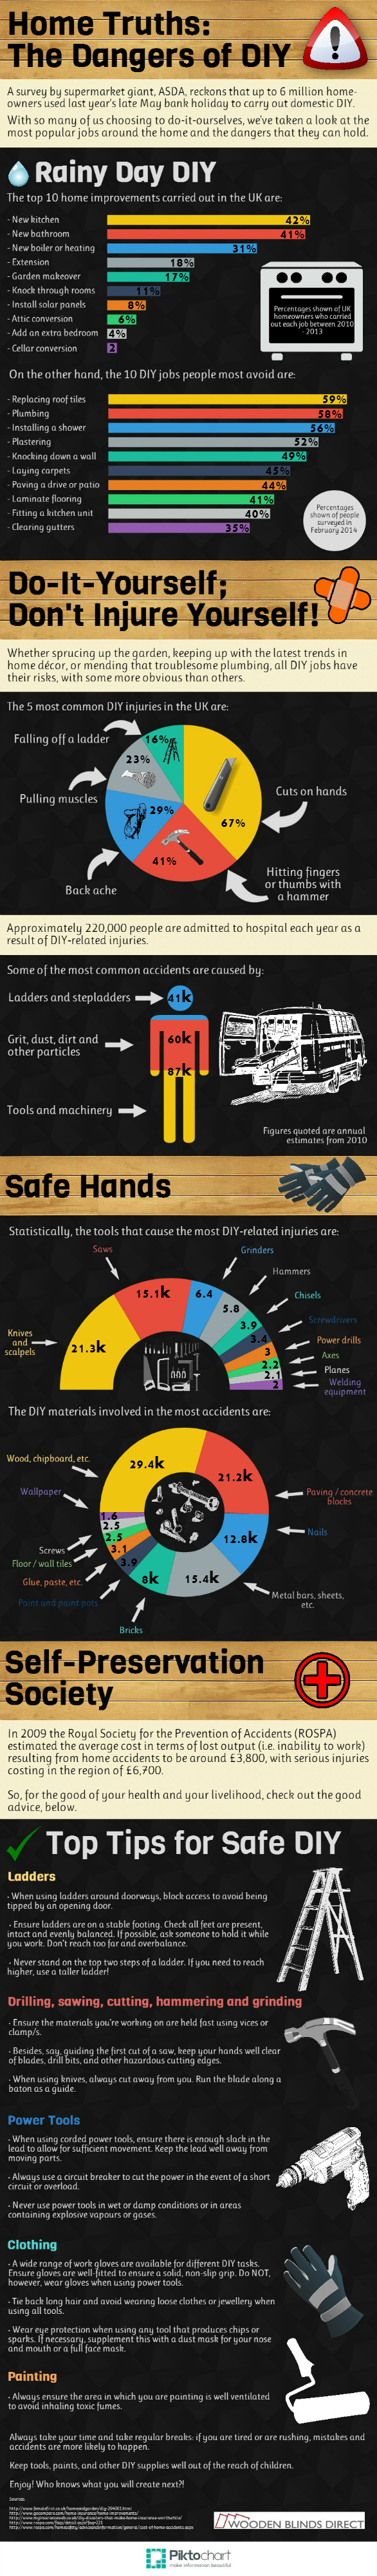 Home Truths-The Dangers of DIY. An infographic showcasing statistics on injuries caused by DIY.